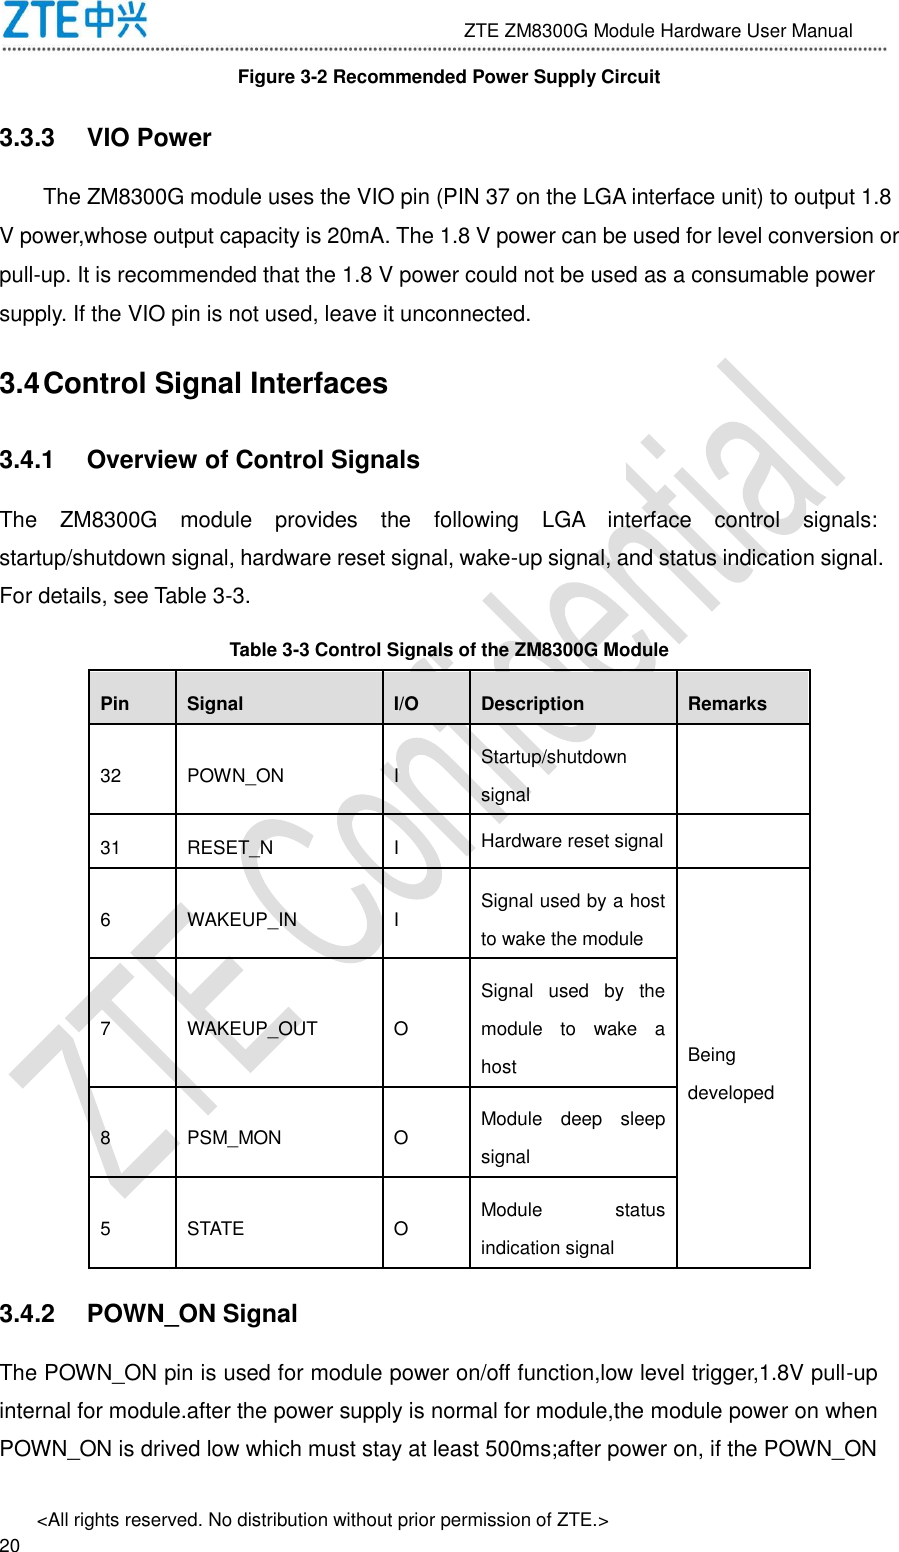                              ZTE ZM8300G Module Hardware User Manual &lt;All rights reserved. No distribution without prior permission of ZTE.&gt;                                                               20 Figure 3-2 Recommended Power Supply Circuit 3.3.3  VIO Power The ZM8300G module uses the VIO pin (PIN 37 on the LGA interface unit) to output 1.8 V power,whose output capacity is 20mA. The 1.8 V power can be used for level conversion or pull-up. It is recommended that the 1.8 V power could not be used as a consumable power supply. If the VIO pin is not used, leave it unconnected. 3.4 Control Signal Interfaces 3.4.1  Overview of Control Signals The  ZM8300G  module  provides  the  following  LGA  interface  control  signals: startup/shutdown signal, hardware reset signal, wake-up signal, and status indication signal. For details, see Table 3-3.   Table 3-3 Control Signals of the ZM8300G Module Pin Signal I/O Description Remarks 32 POWN_ON I Startup/shutdown signal  31 RESET_N I Hardware reset signal  6 WAKEUP_IN I Signal used by a host to wake the module Being developed 7 WAKEUP_OUT O Signal  used  by  the module  to  wake  a host 8 PSM_MON O Module  deep  sleep signal 5 STATE O Module  status indication signal 3.4.2  POWN_ON Signal The POWN_ON pin is used for module power on/off function,low level trigger,1.8V pull-up internal for module.after the power supply is normal for module,the module power on when POWN_ON is drived low which must stay at least 500ms;after power on, if the POWN_ON 